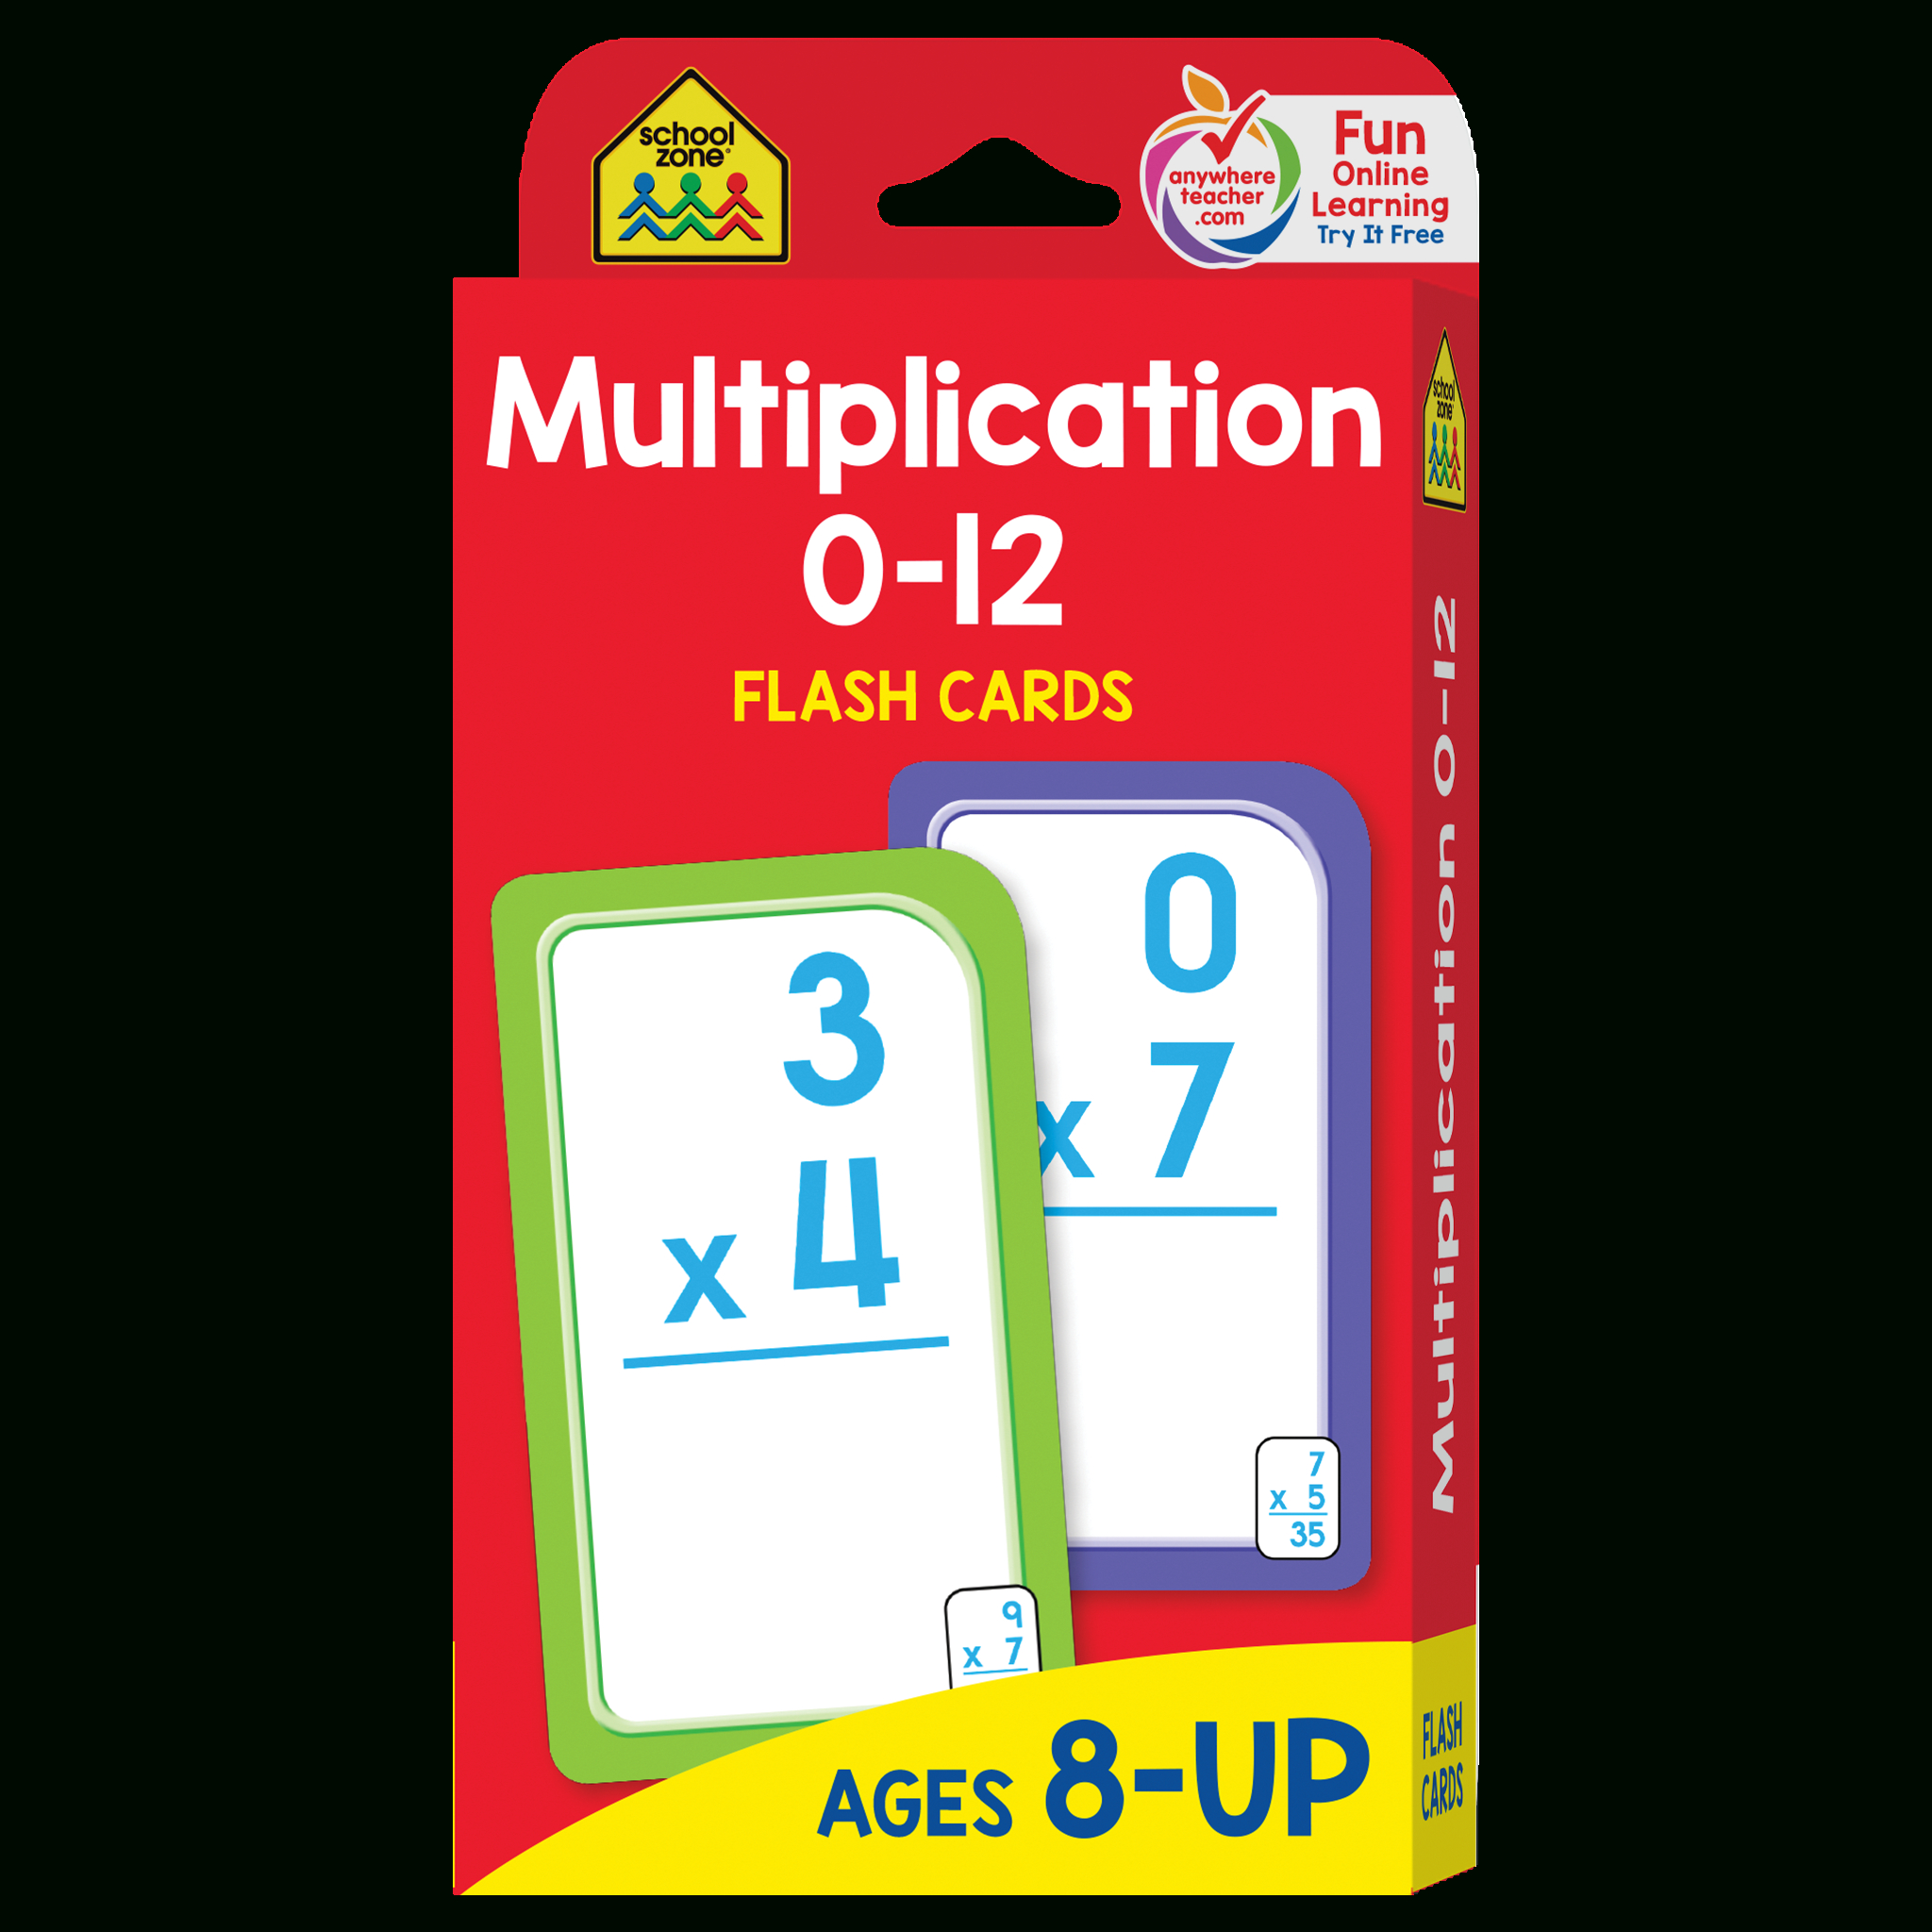 Multiplication 0-12 Flash Cards pertaining to Printable Multiplication Flash Cards 0-12